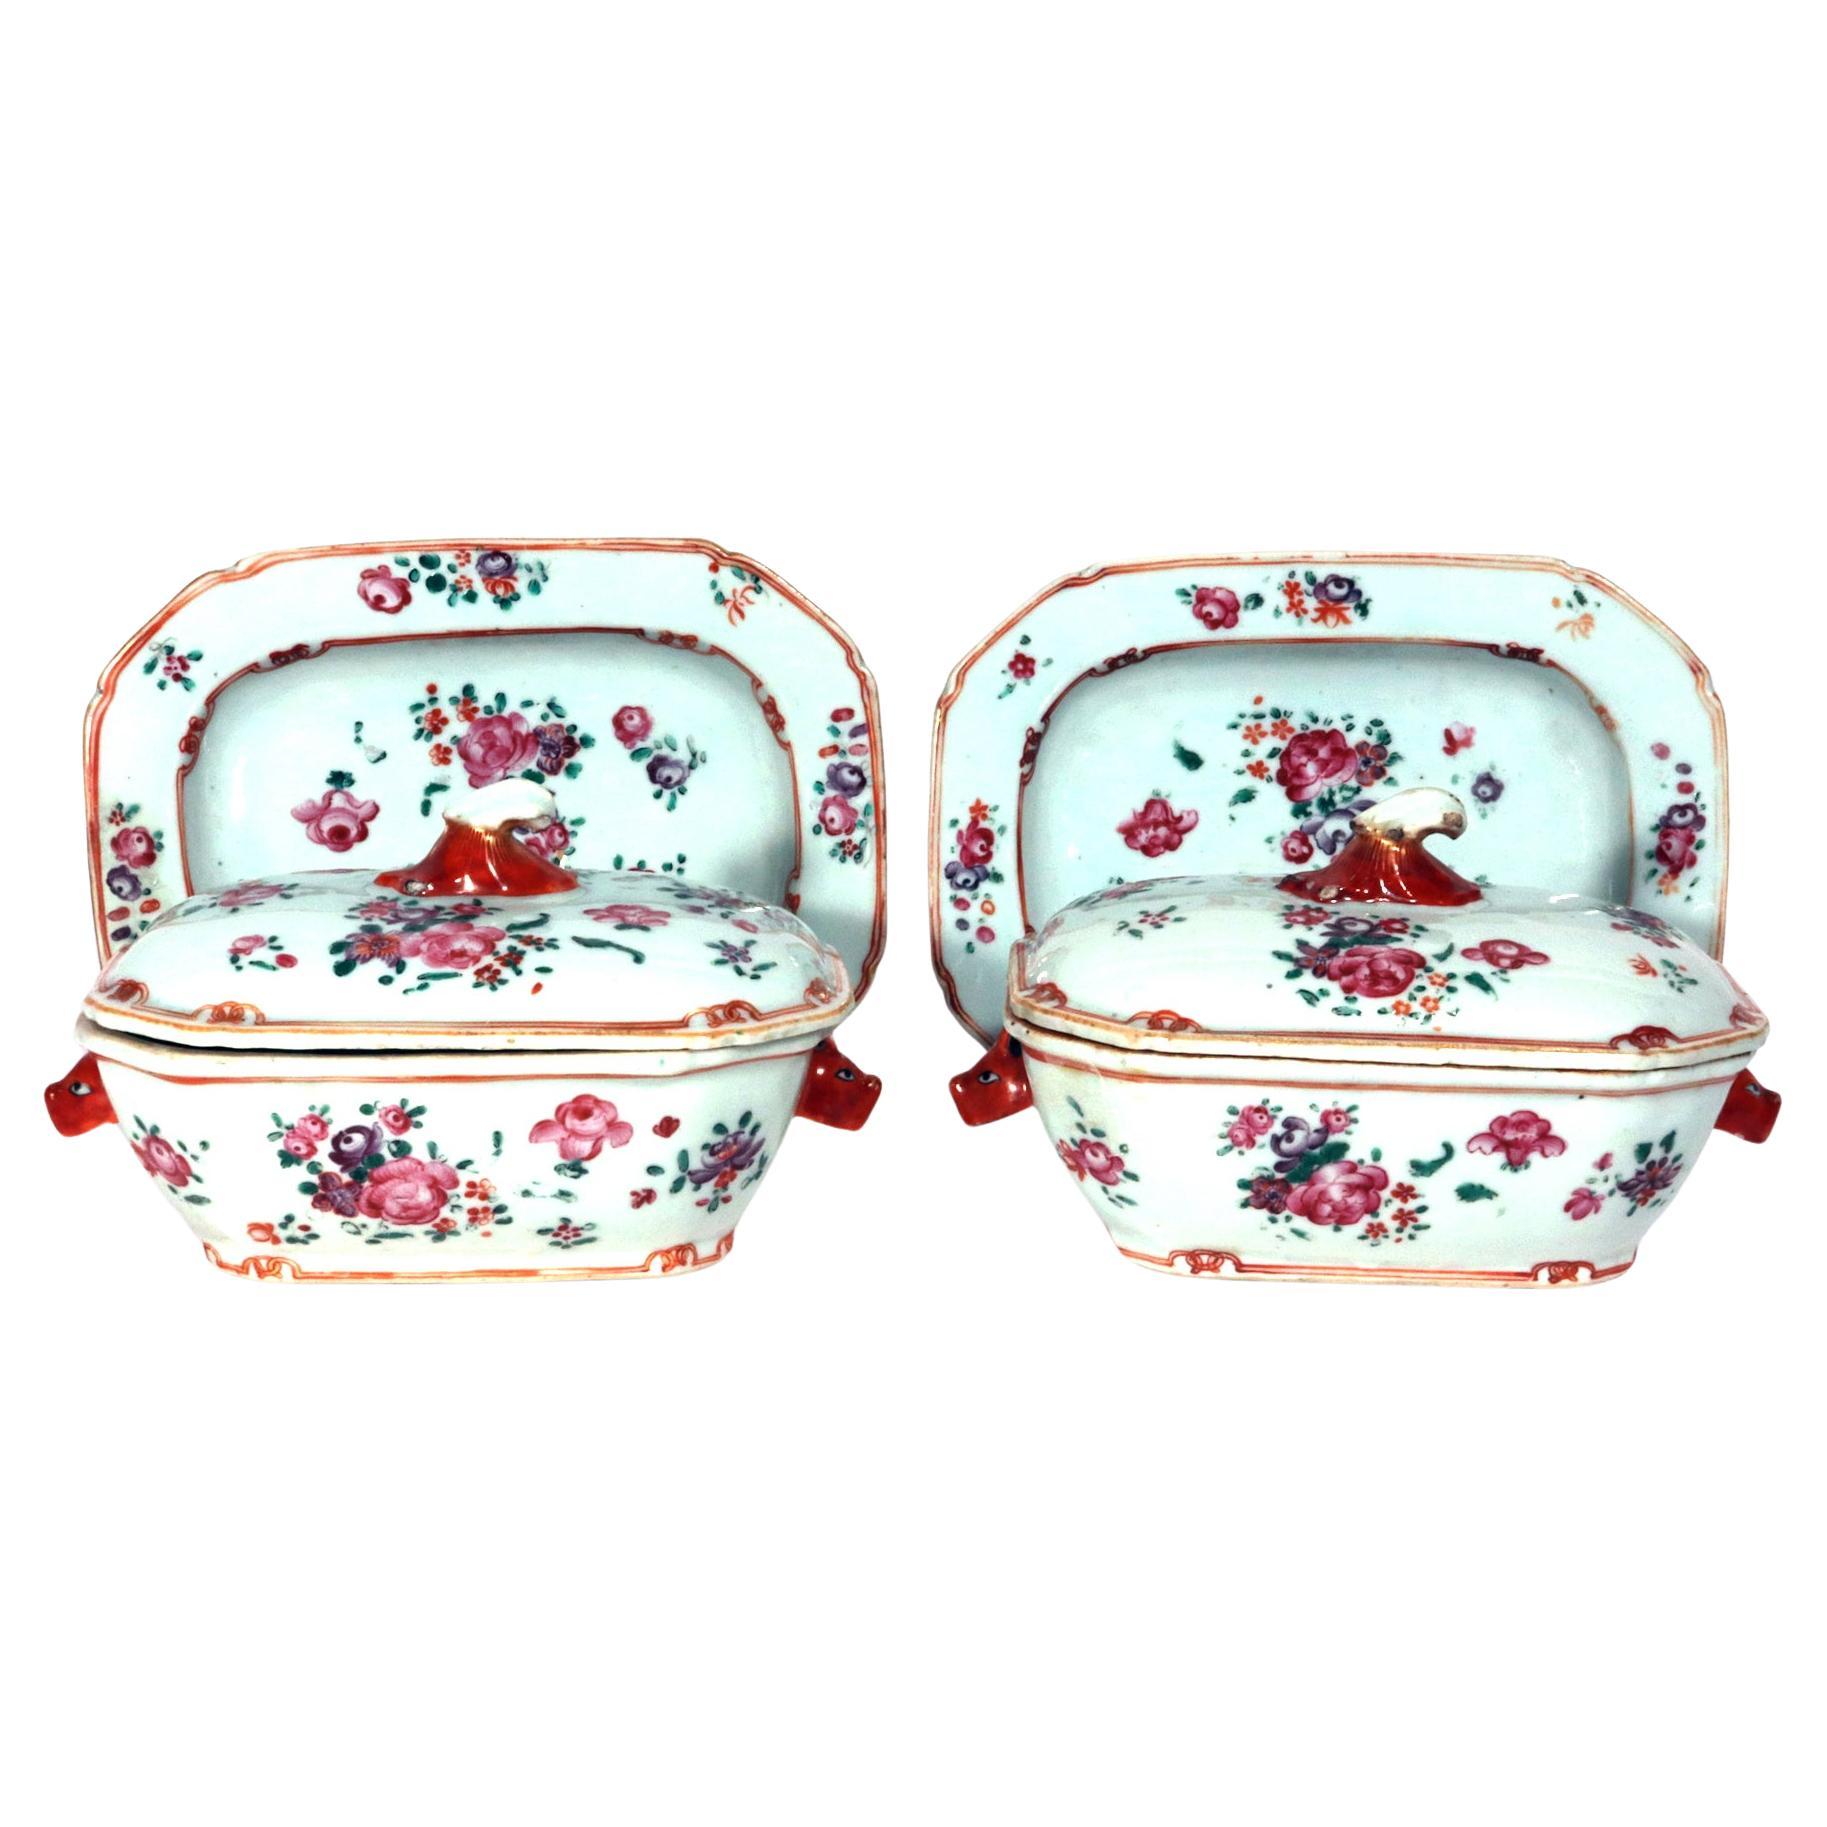 Chinese Export Porcelain Famille Rose Sauce Tureens, Covers & Stands